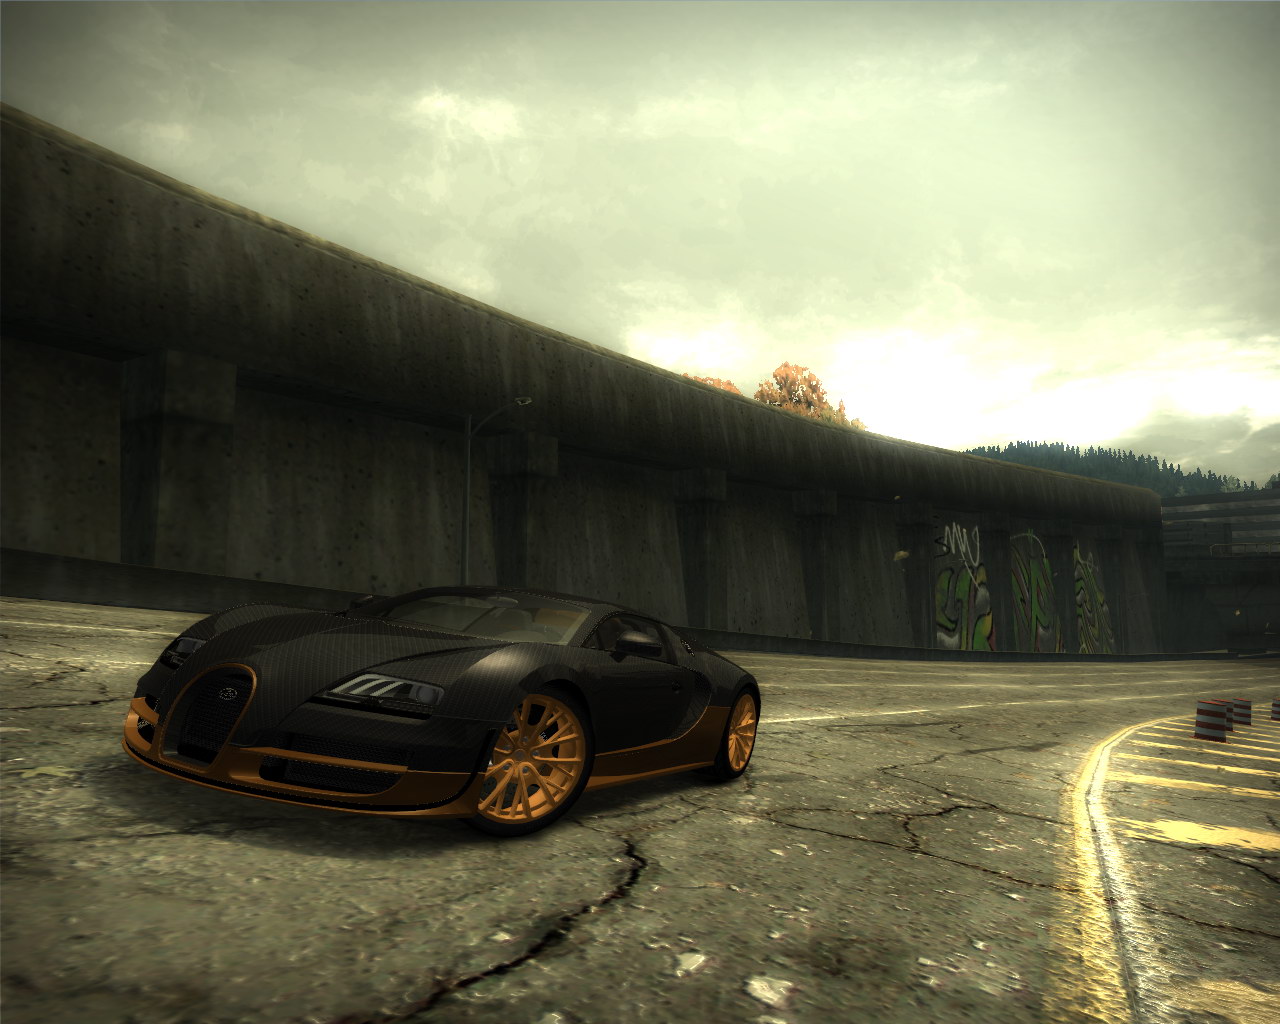 Нед фор спид мост вондет. NFS most wanted. NFS most wanted 2005 Black Edition. Из need for Speed most wanted 2005. Bugatti Veyron NFS most wanted 2005.